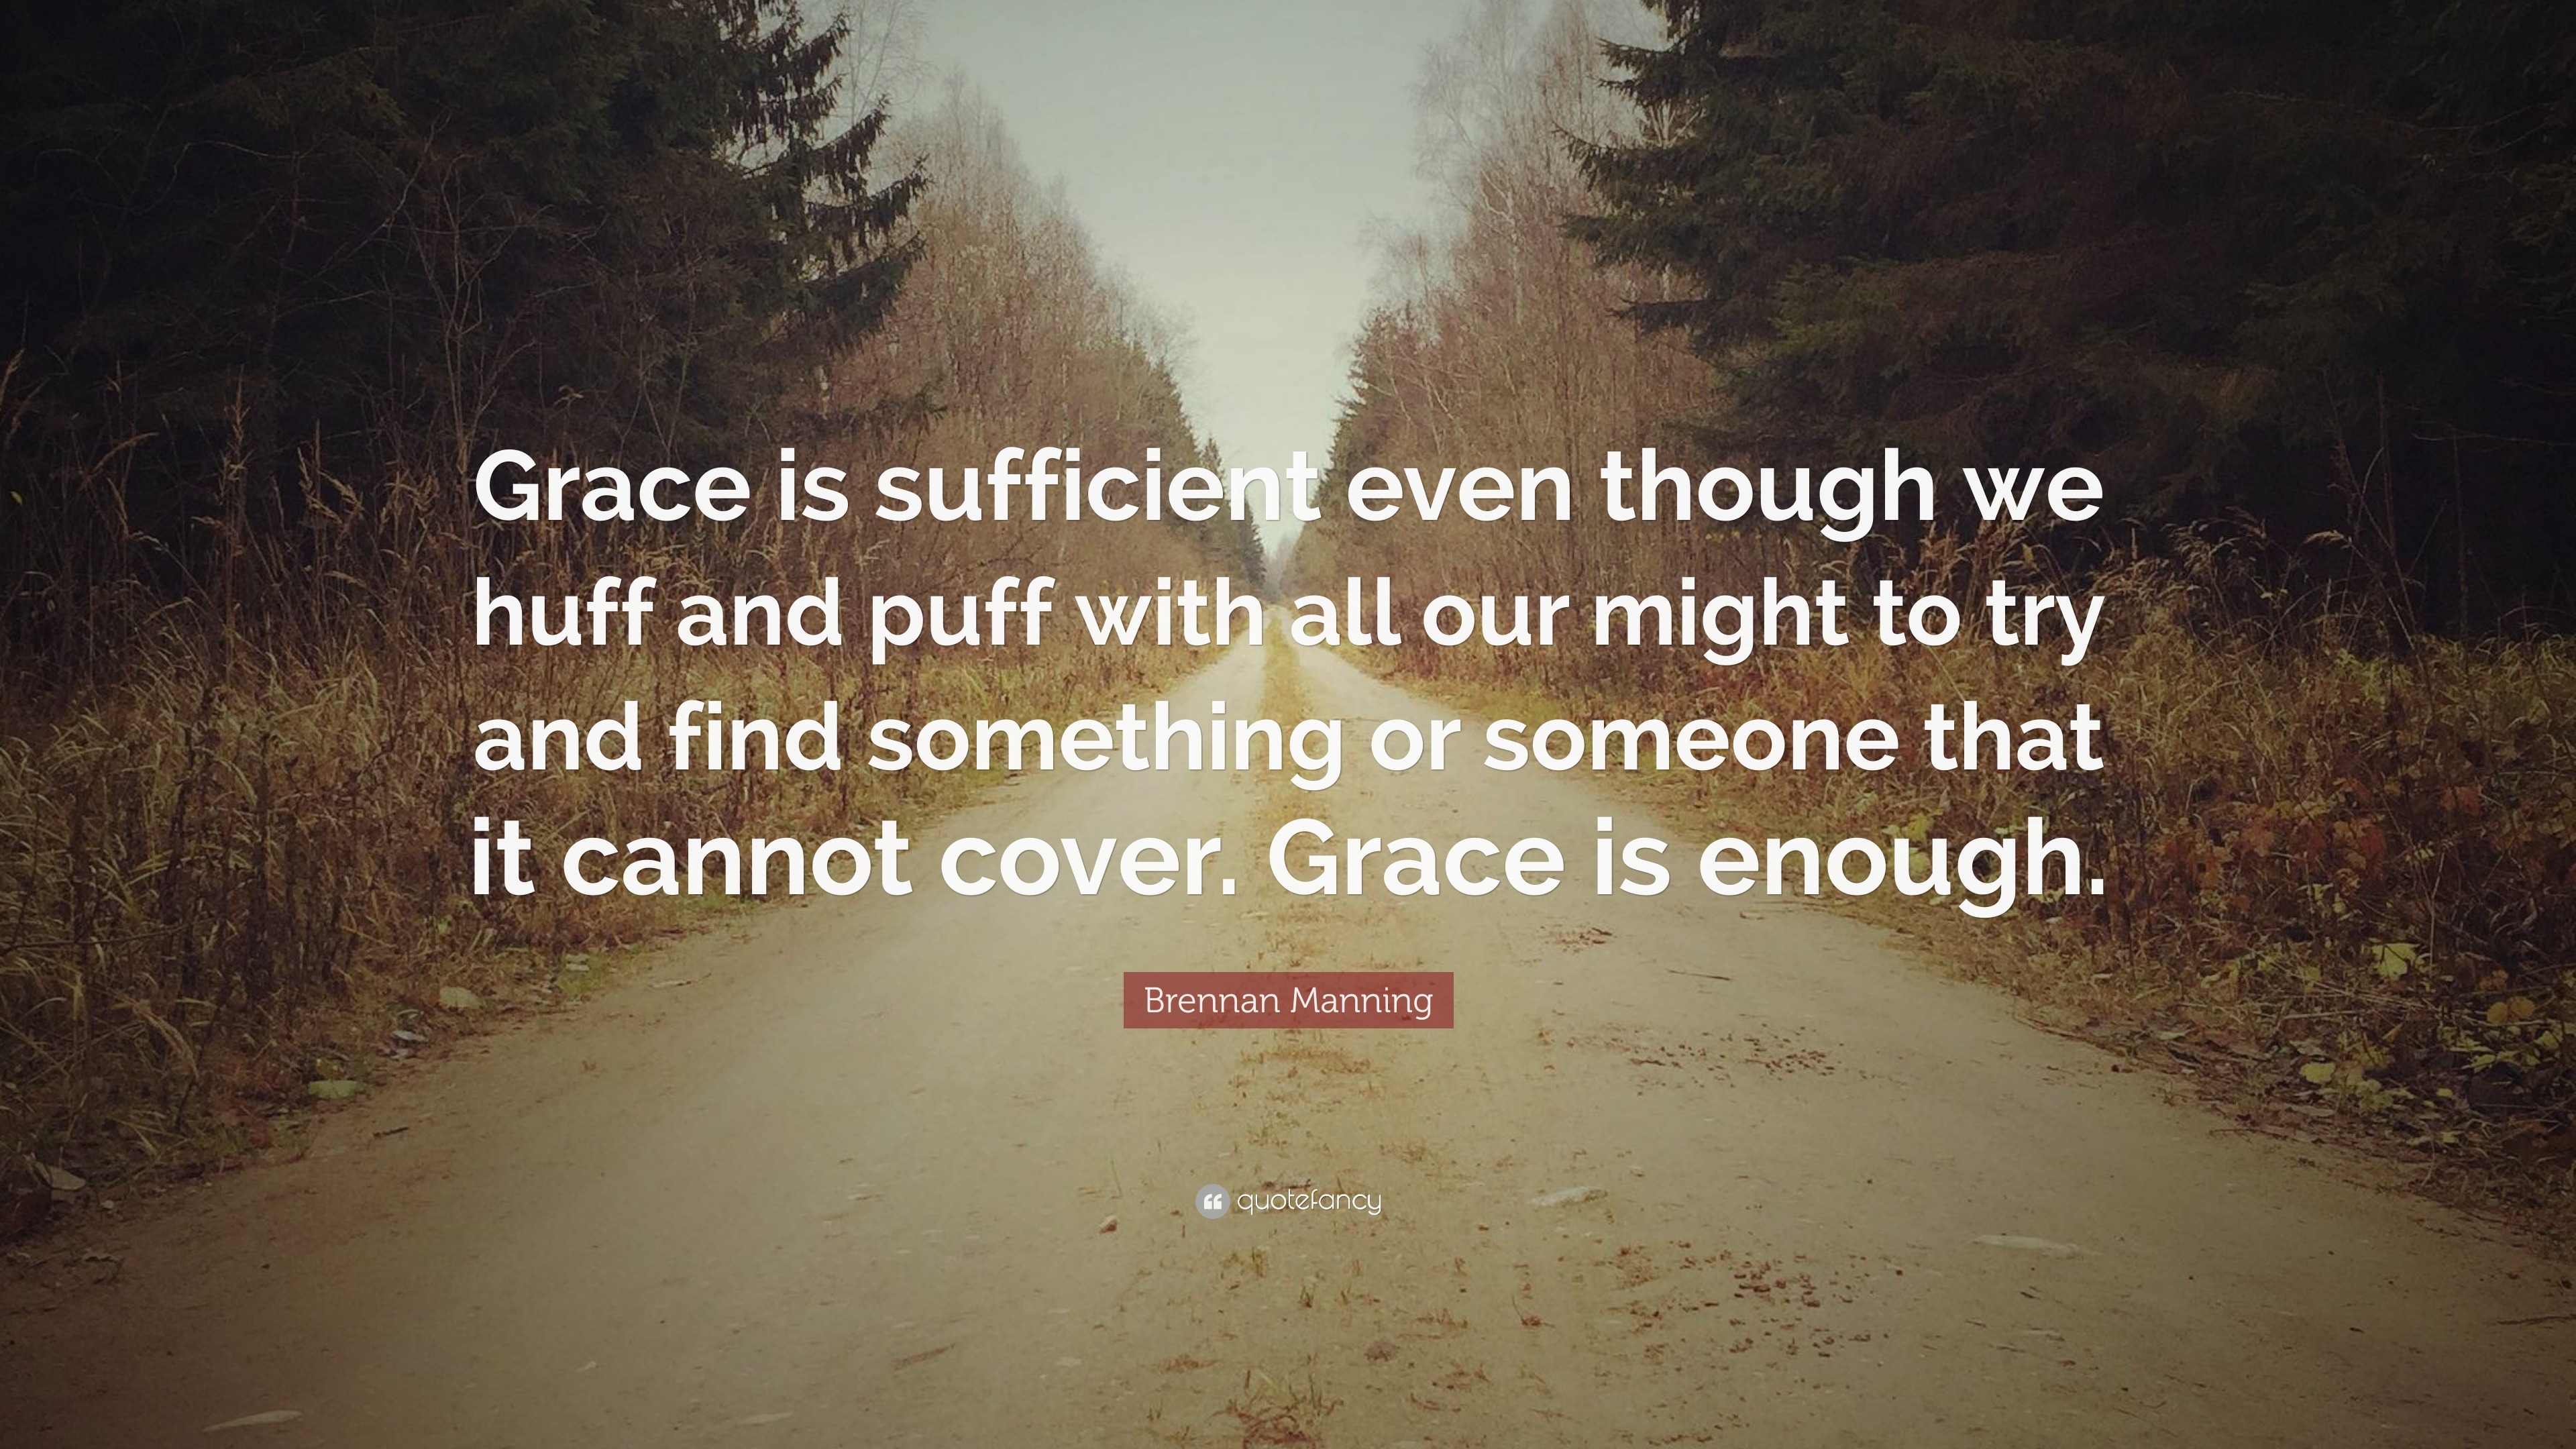 319519-Brennan-Manning-Quote-Grace-is-sufficient-even-though-we-huff-and.jpg